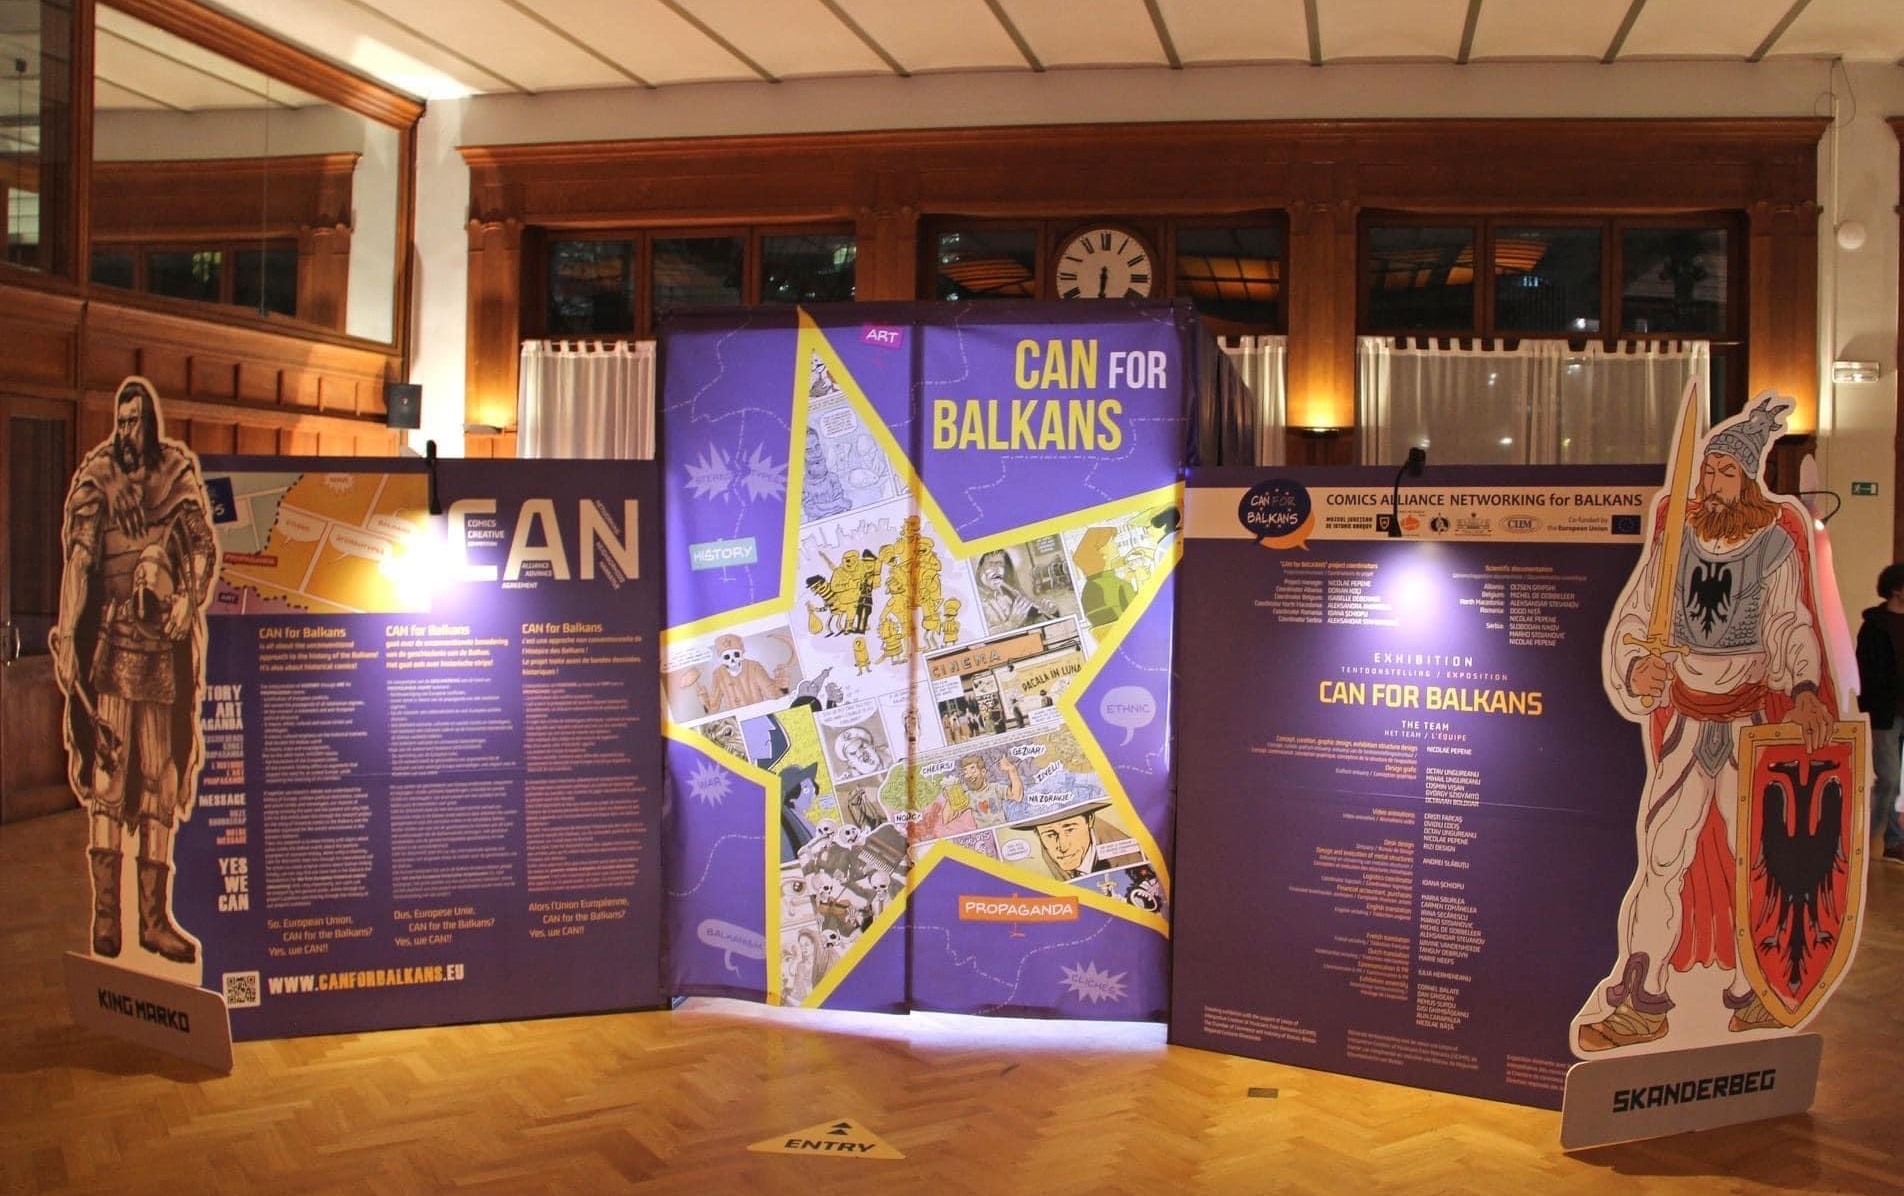 The ”CAN for Balkans” exhibition in Brussels